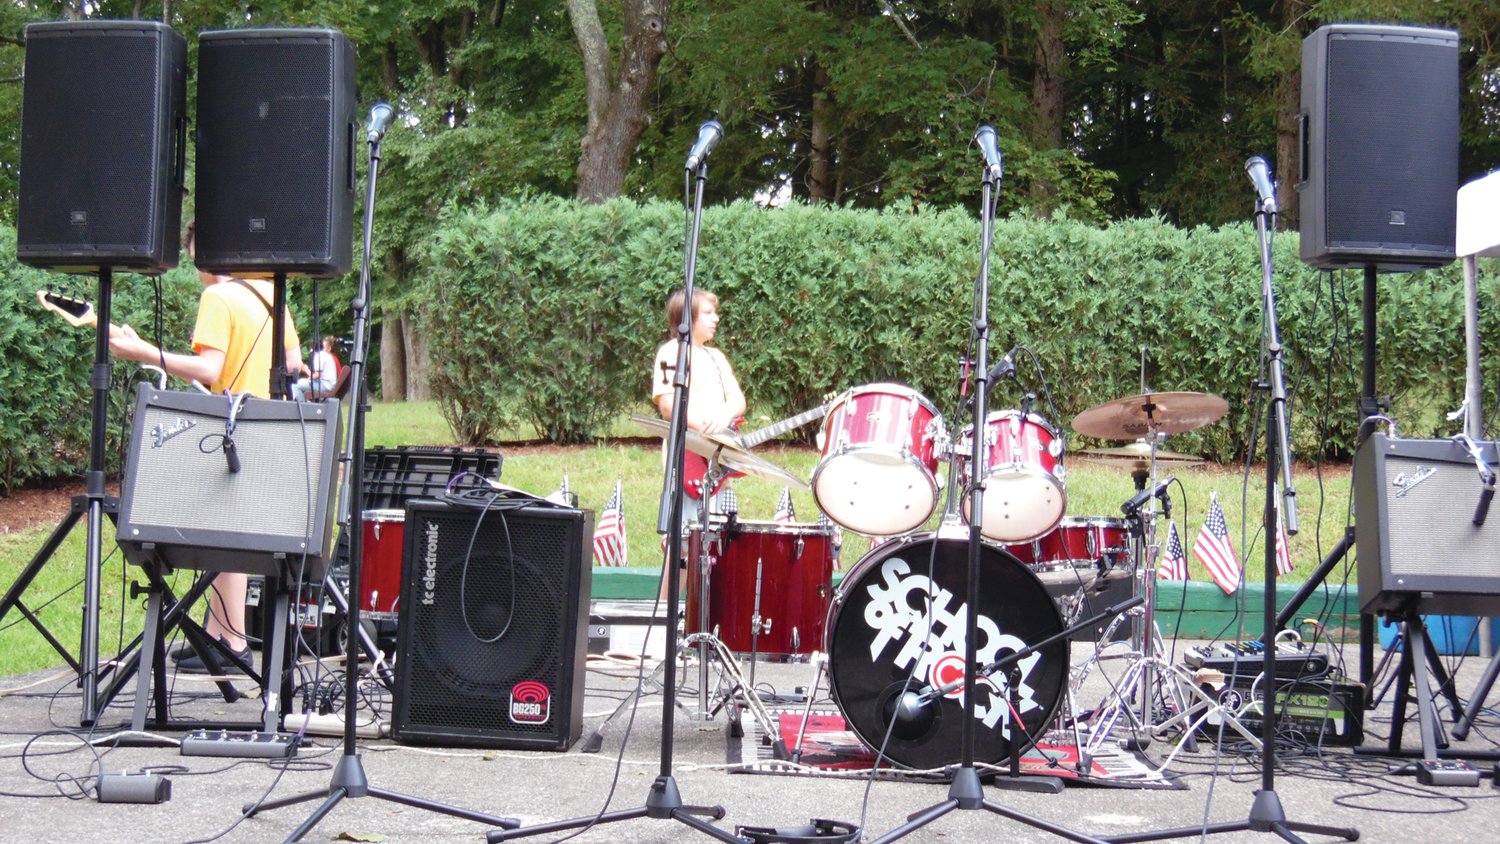 ROCKING THE FESTIVAL: Students from School of Rock will perform on-stage at 2 p.m. Saturday, Sept. 11.